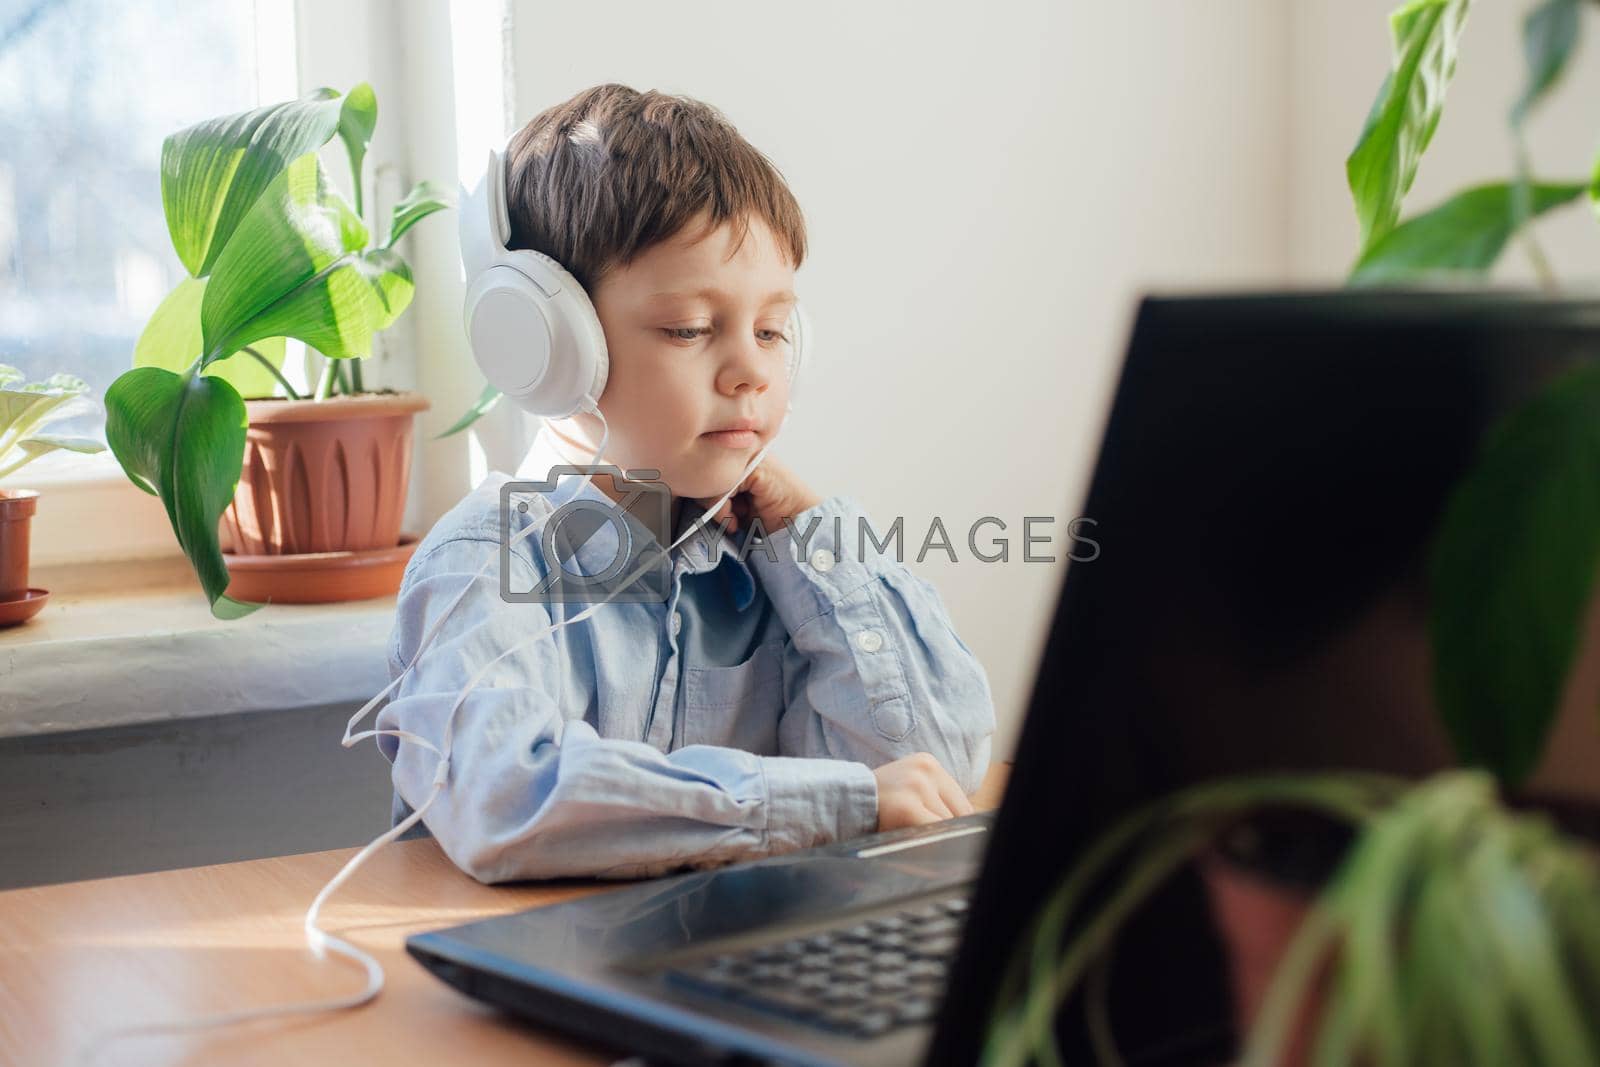 The boy is engaged in online education . Online training. Home schooling. A laptop. Child and technology. An article about the choice of education for a child. Article about home schooling online